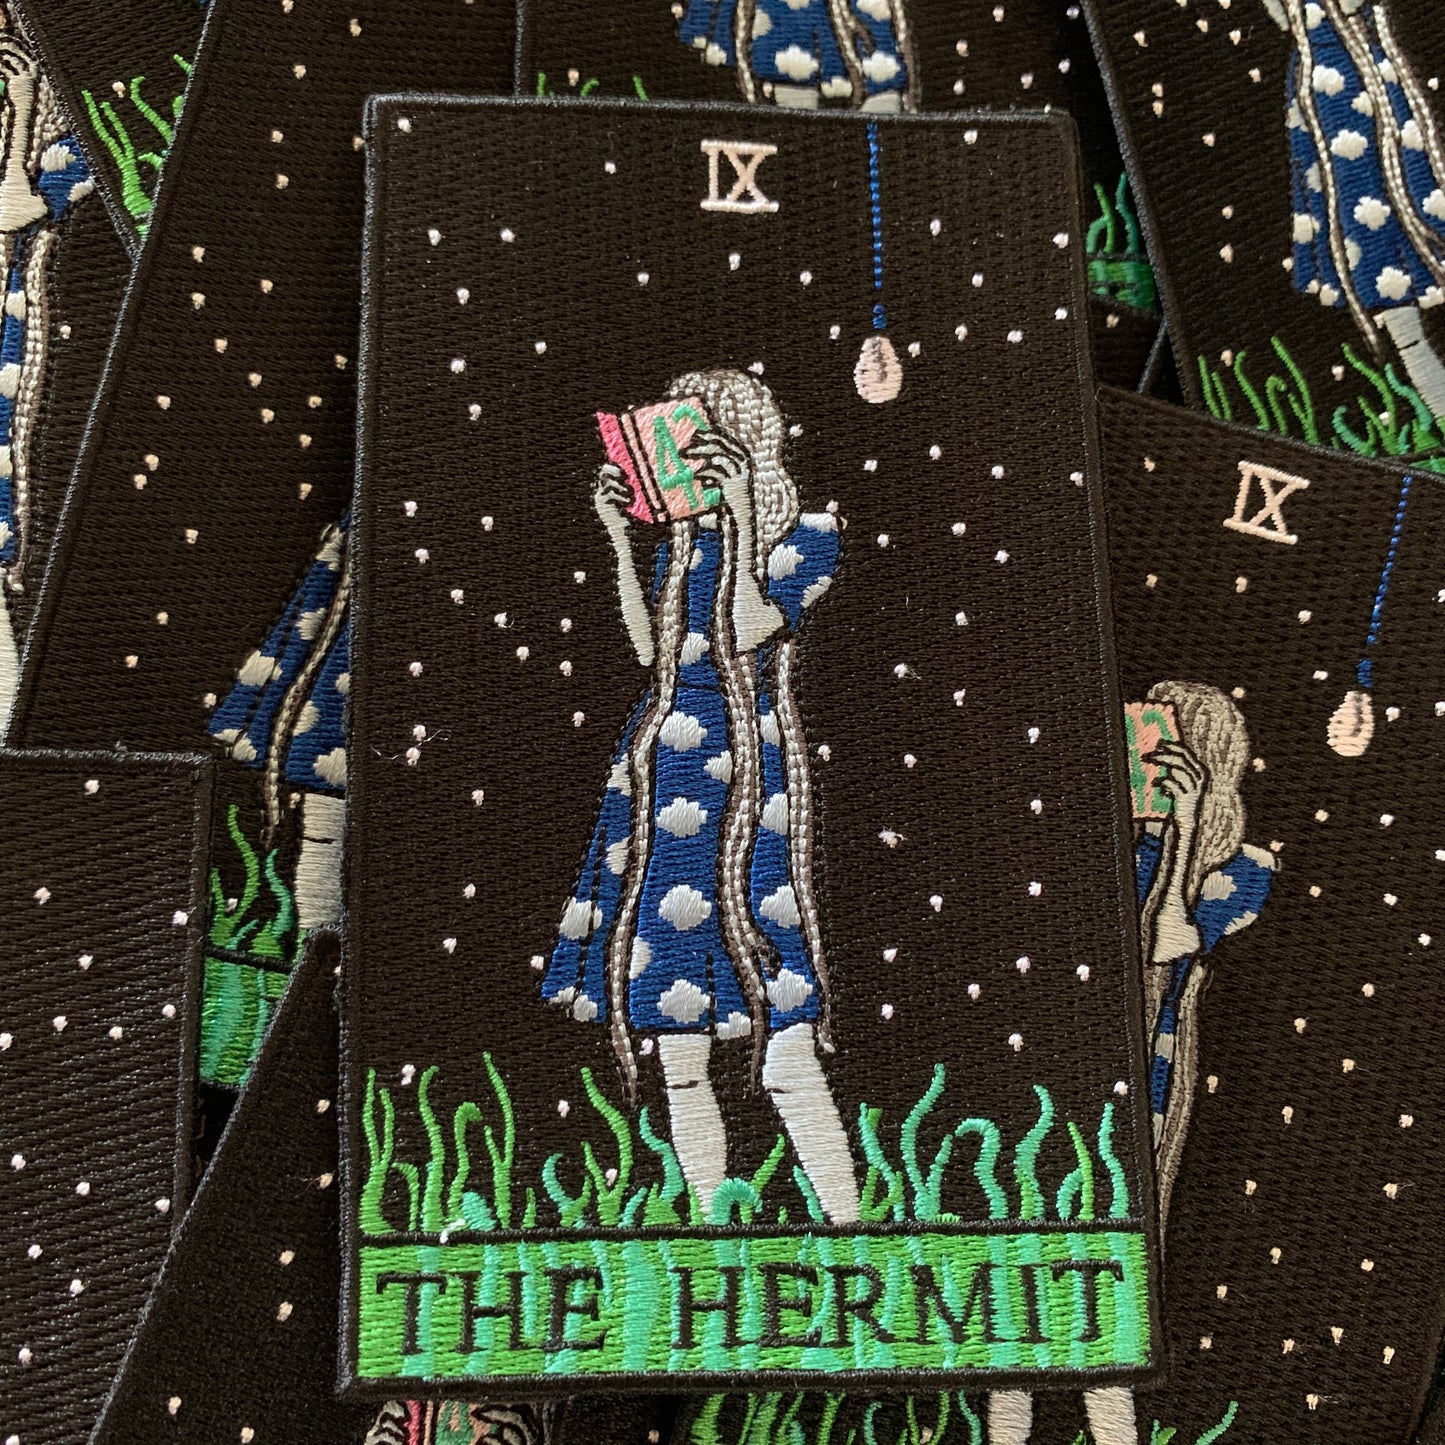 The Hermit Tarot Embroidered Patch